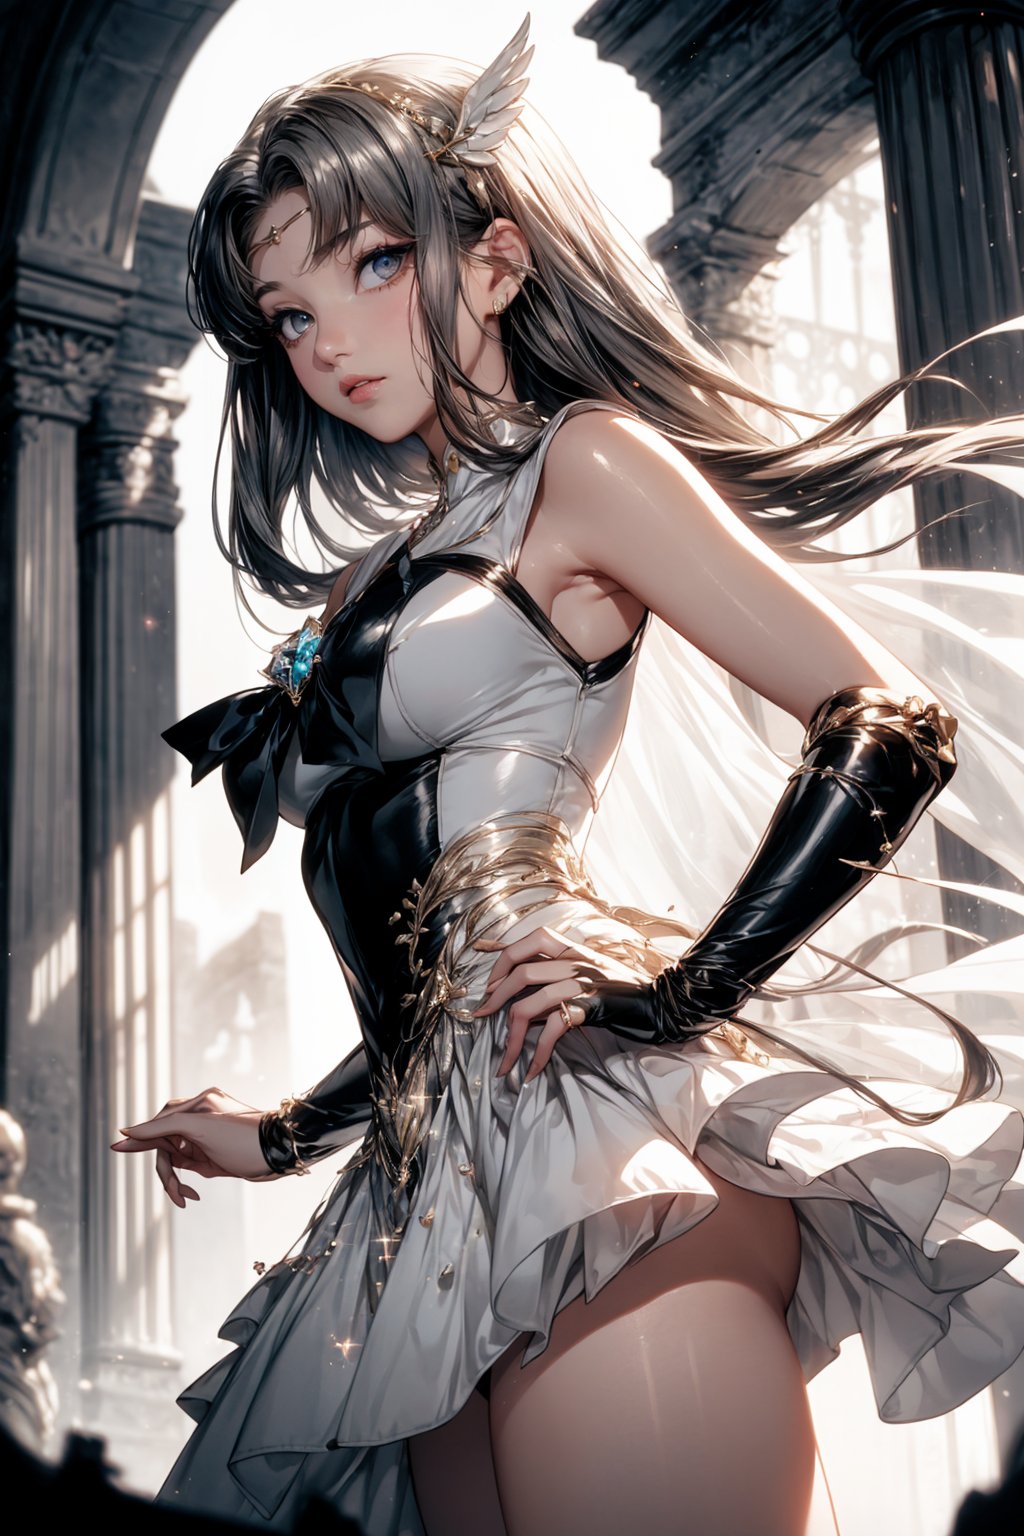 In a majestic black and white entanglement of ancient ruins, Sailor Moon stands as a bride-goddess, her shimmering silver and crystal attire glistening in the moonlight. Her long hair flows like a river of silk, with delicate strands framing her face. A dragon's head rises from the rubble, its scales glinting like precious jewels. The high-contrast image is rendered in hyper-quality detail, with intricate textures and subtle shading that draws the viewer in.